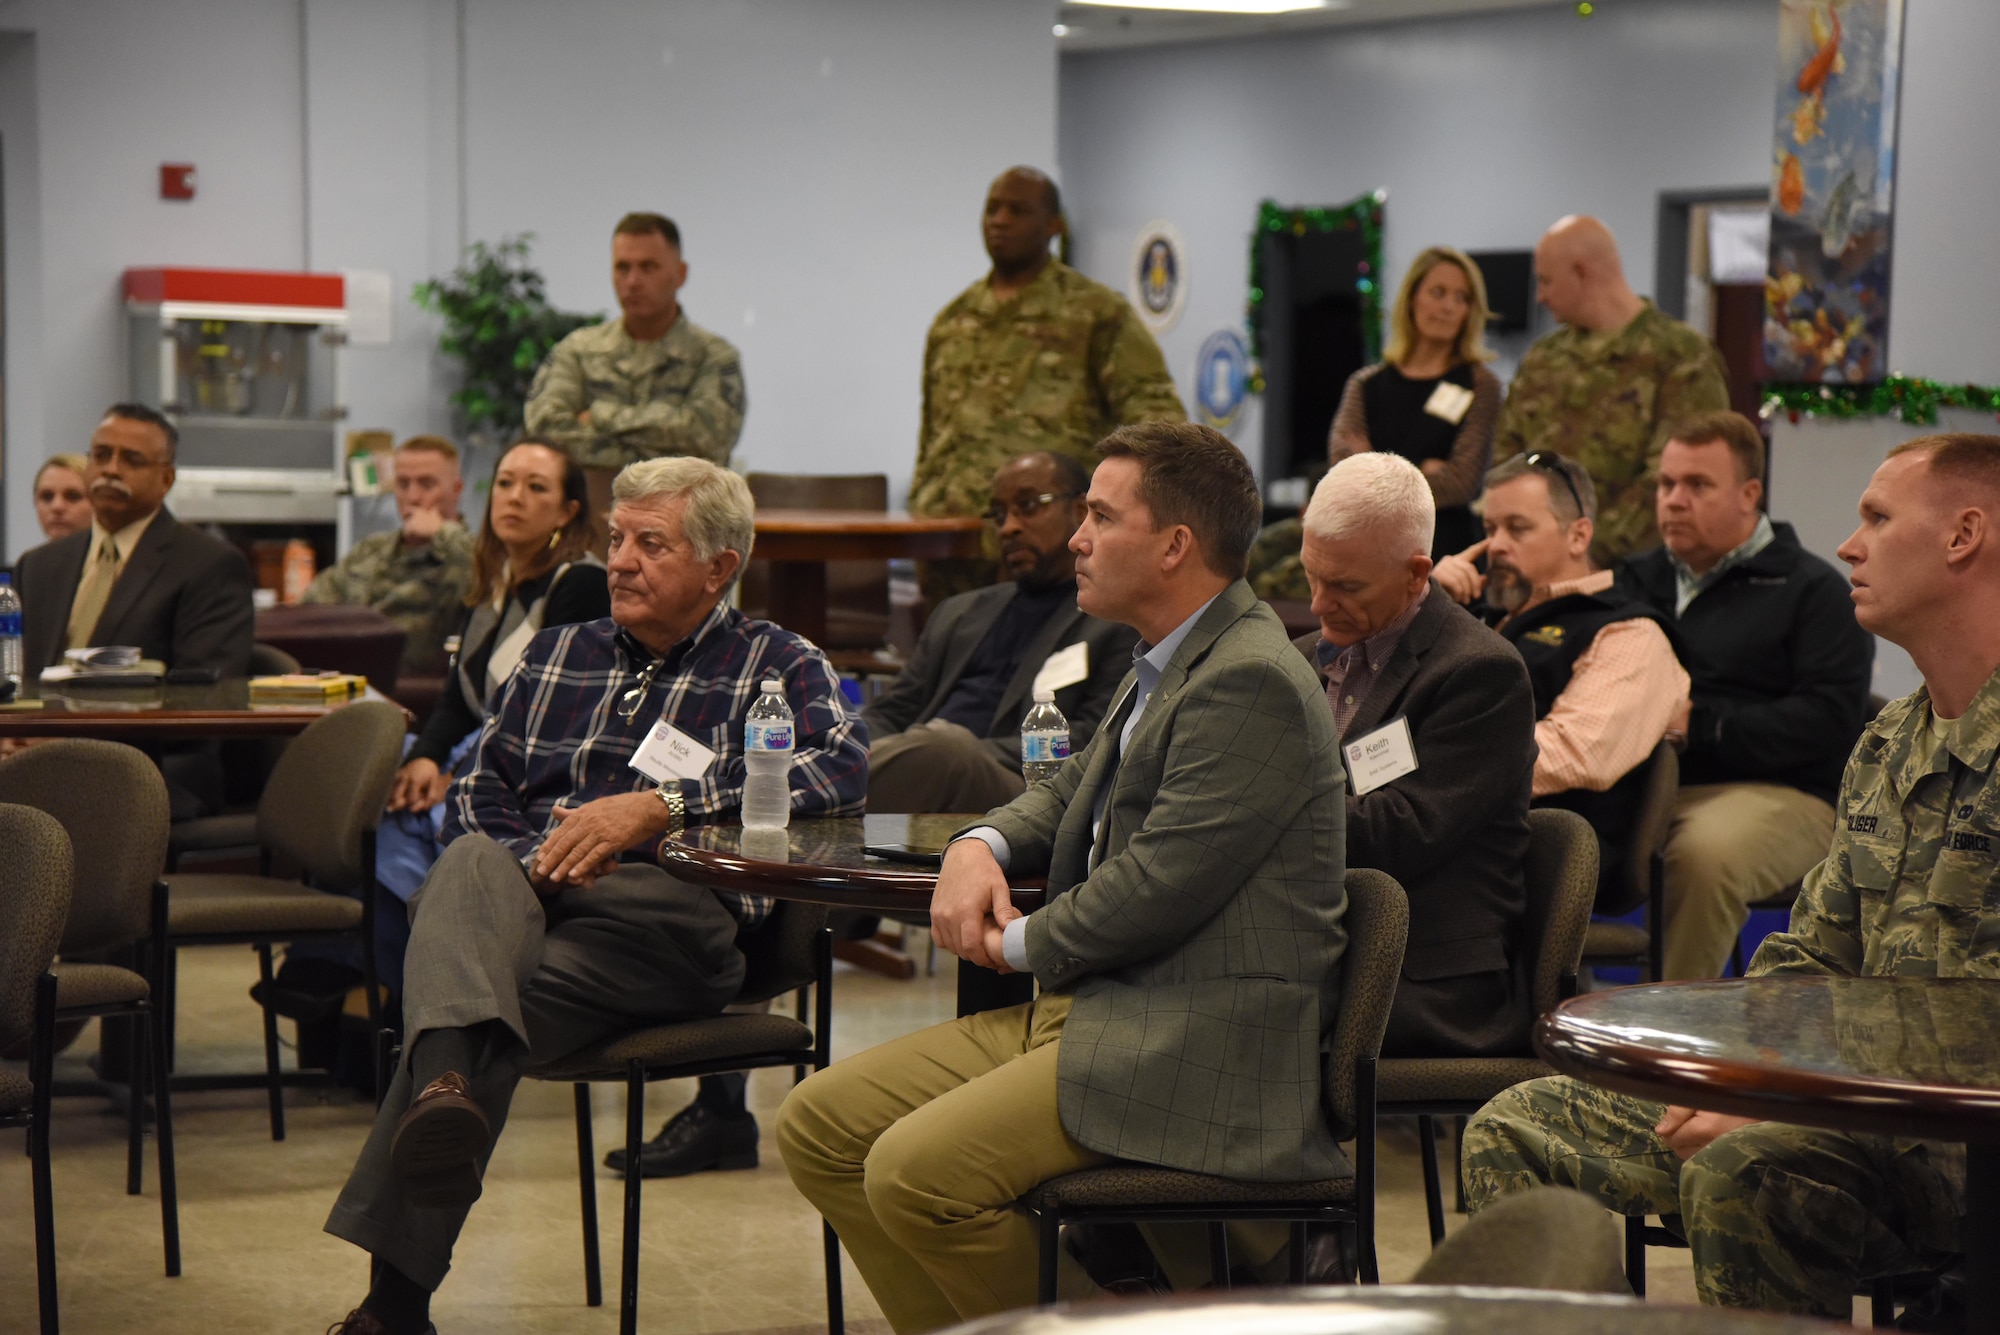 Keesler personnel and members of the Governor's Defense Initiative Task Force attend an 81st Training Wing mission brief on Keesler Air Force Base, Mississippi, Dec. 13, 2018. Keesler hosted the delegation in order to engage in discussion about making Mississippi a more attractive place for Airmen and their families and to attract more defense industry. (U.S. Air Force photo by Kemberly Groue)